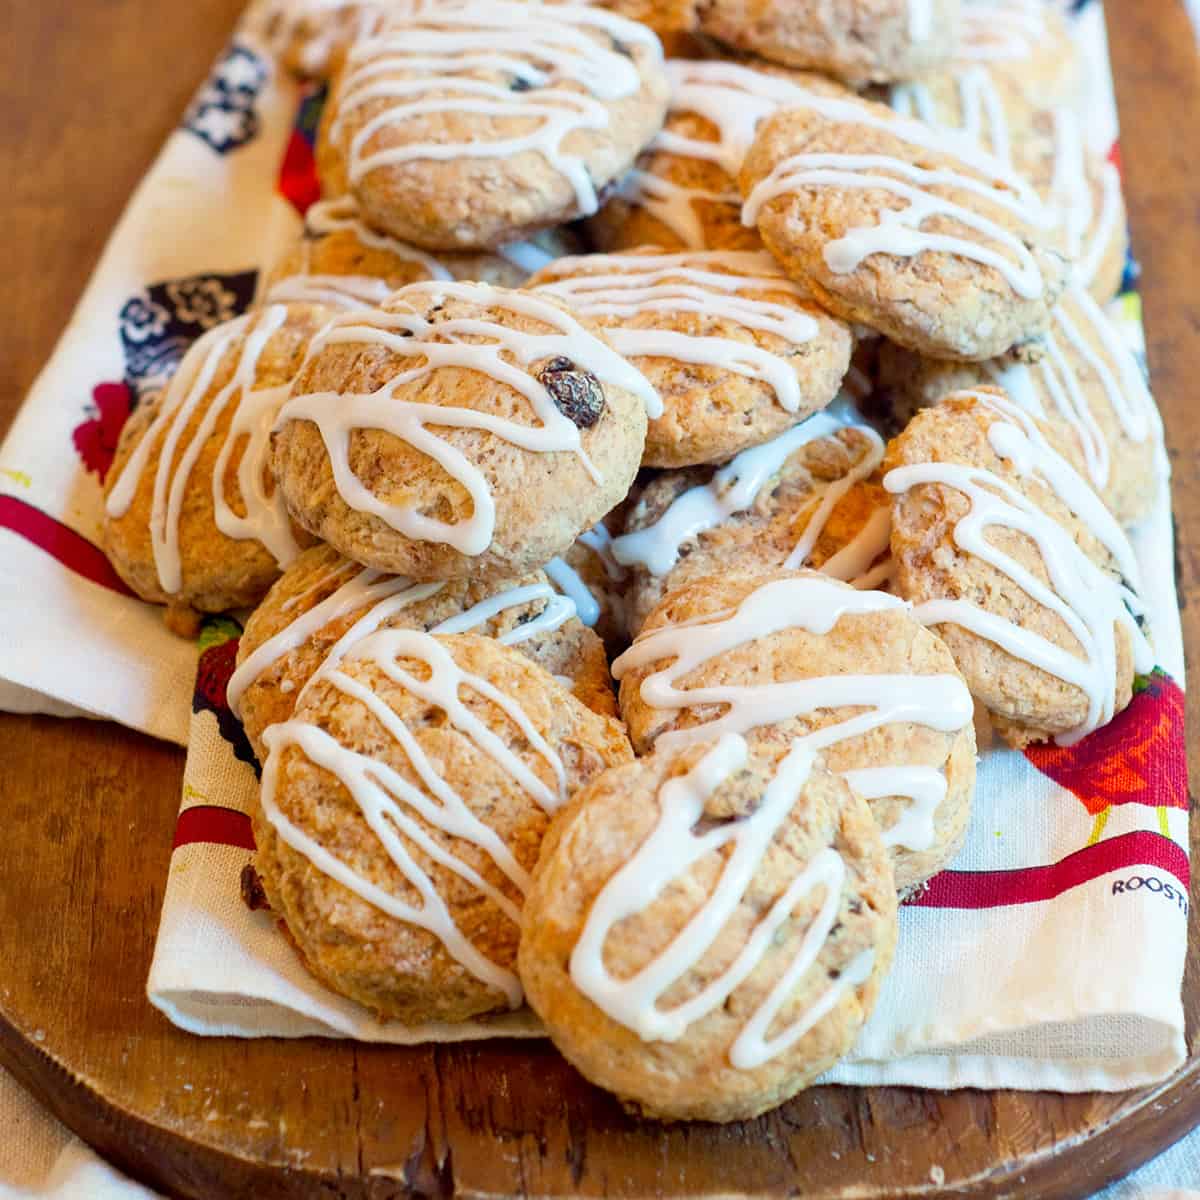 Cinnamon raisin biscuits on a wooden board.